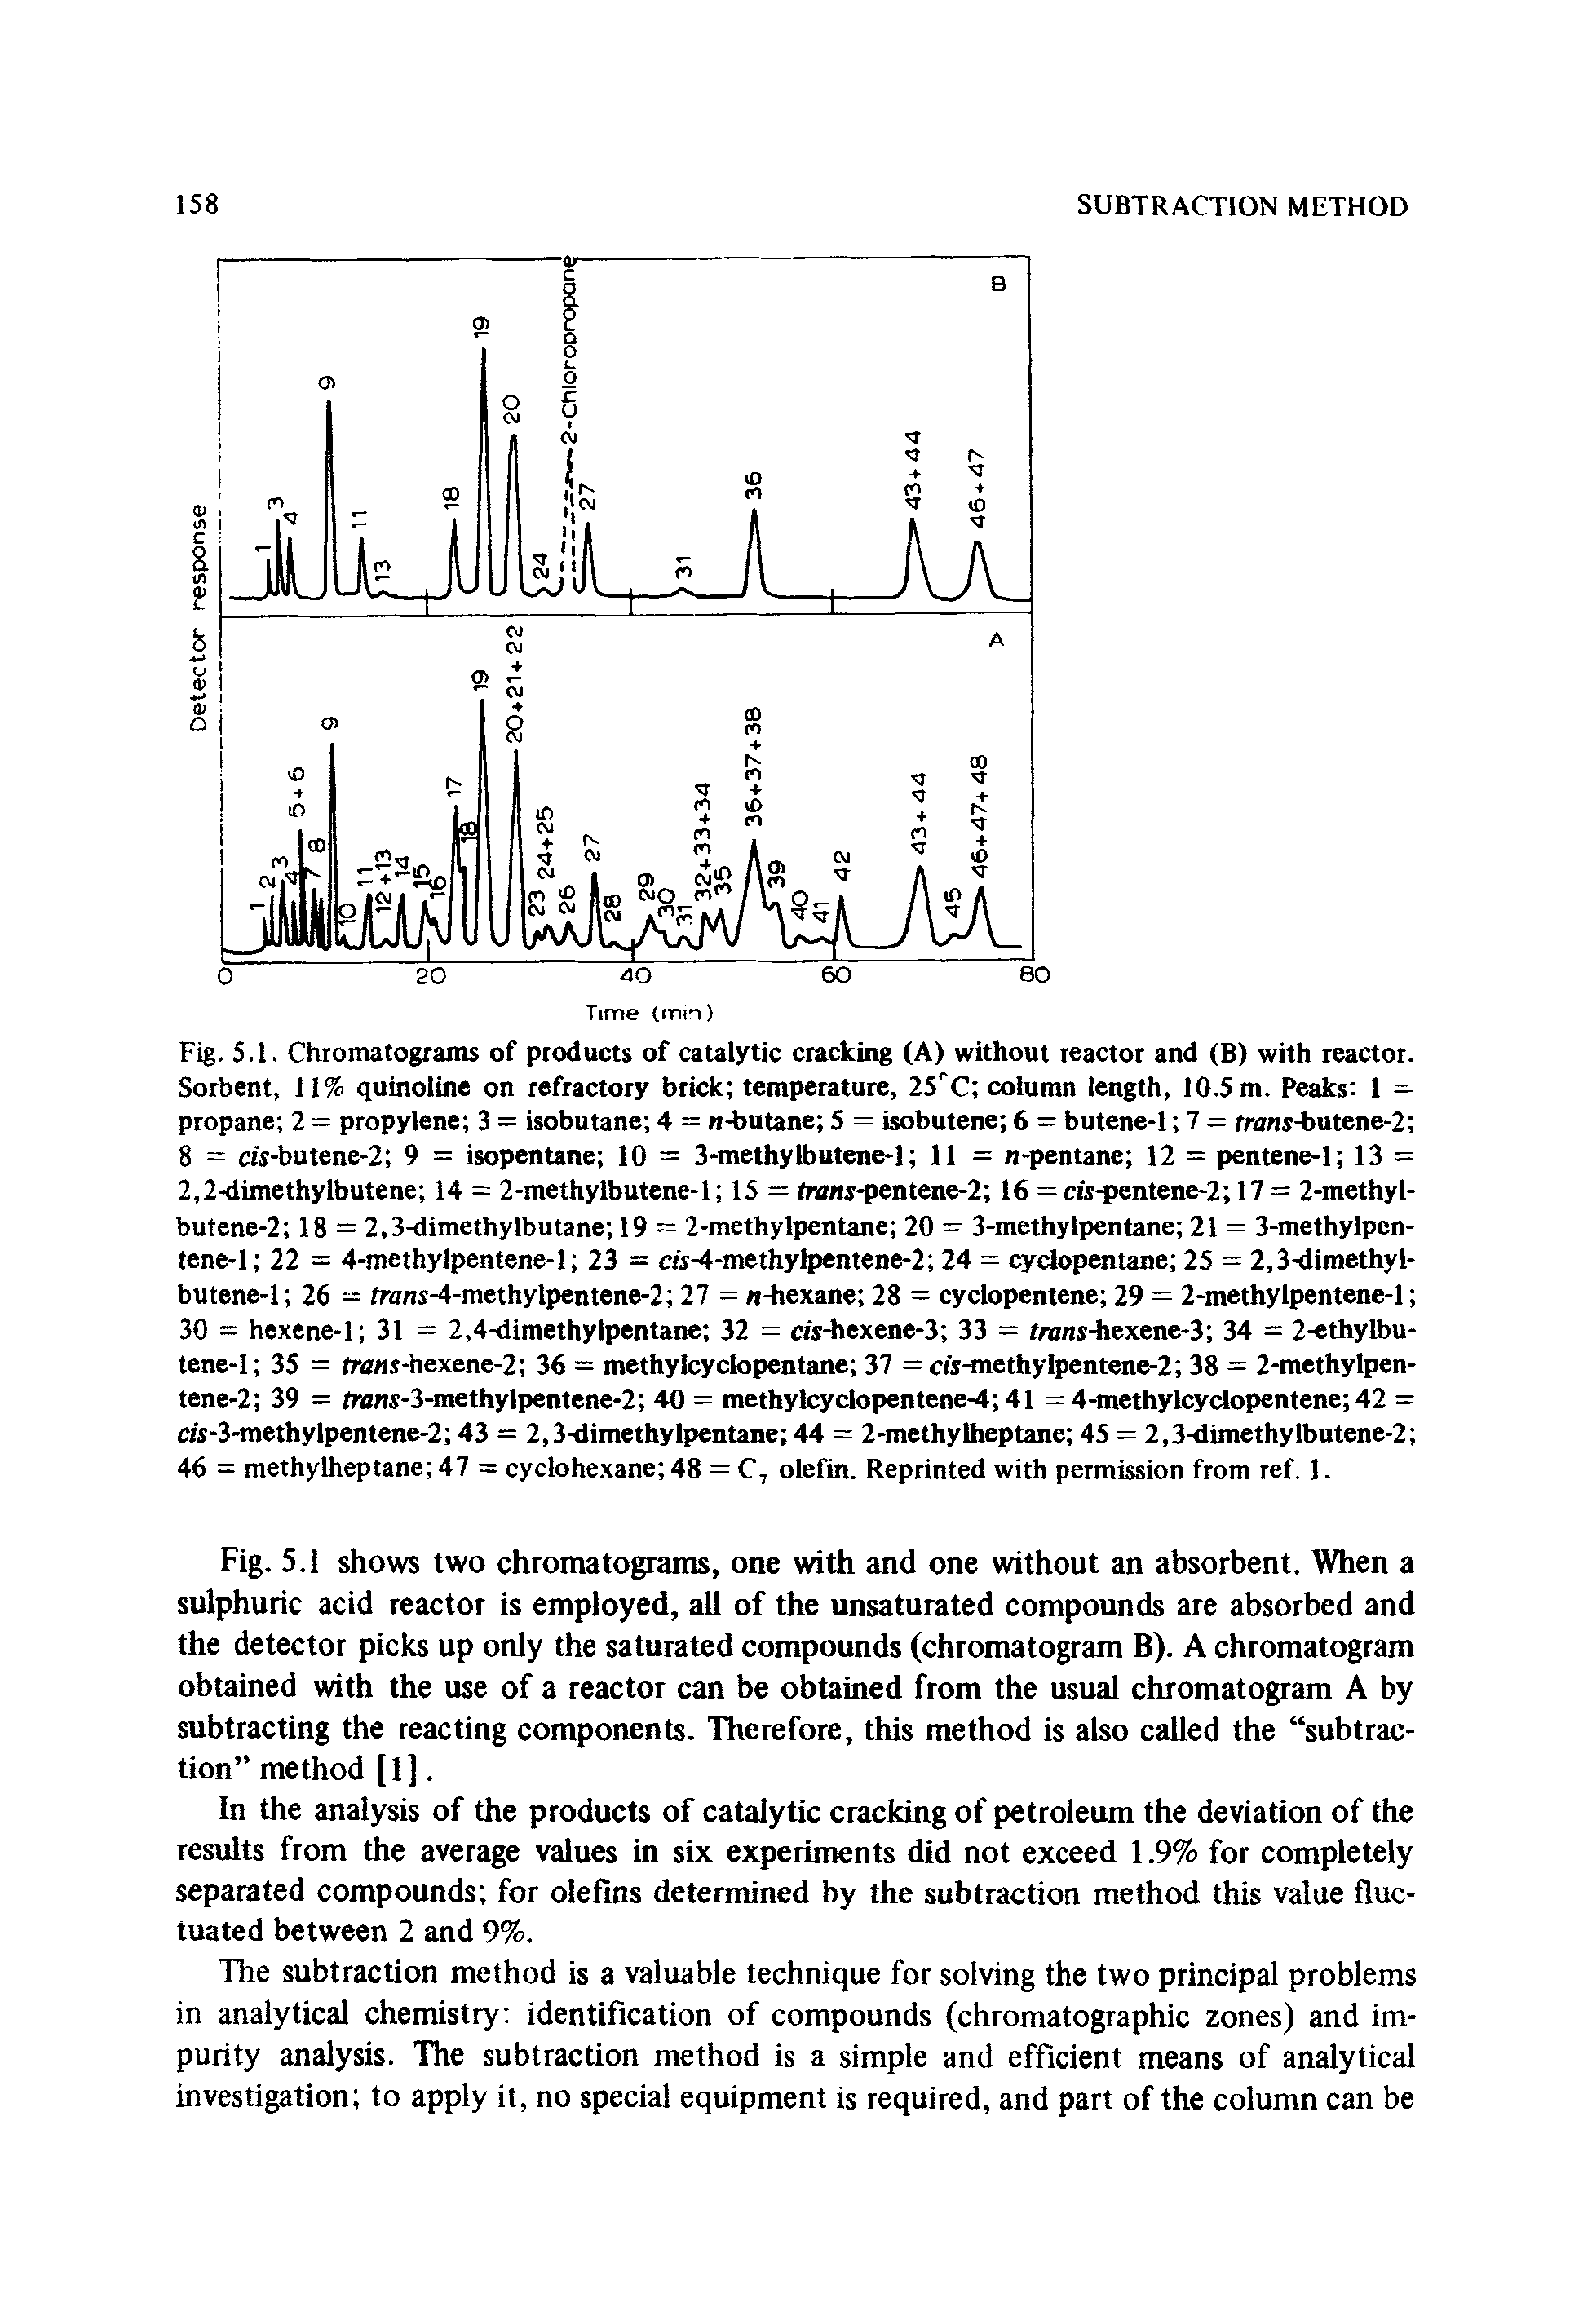 Fig. 5.1. Chromatograms of products of catalytic cracking (A) without reactor and (B) with reactor. Sorbent, 11% quinoline on refractory brick temperature, 25 C column length, 10.5 m. Peaks 1 = propane 2 = propylene 3 = isobutane 4 = n-butane 5 = isobutene 6 = butene-1 7 = rmns-butene-2 8 = cis-butene-2 9 = isopentane 10 = 3-methylbutene-l 11 = n-pentane 12 = pentene-1 13 = 2,2-dimethylbutene 14 = 2-methylbutene-l 15 = tnms-pentene-2 16 = cfsi)entene-2 17 = 2-methyl-butene-2 18 = 2,3-dimethylbutane 19 = 2-methylpentane 20 = 3-methylpentane 21 = 3-methylpen-tene-1 22 = 4-methylpentene-l 23 = c -4-methylpentene-2 24 = cyclopentane 25 = 2,3-dimethyl-butene-1 26 = fmns-4-methylpentene-2 27 = w-hexane 28 = cyclopentene 29 = 2-methylpentene-l 30 = hexene-1 31 = 2,4-dimethylpentane 32 = cis-hexene-3 33 = tnms-hexene-3 34 = 2-ethylbu-tene-1 35 = trans-hexene-2 36 = methylcyclopentane 37 = cis-methylpentene-2 38 = 2-methylpen-tene-2 39 = pisns-3-methylpentene-2 40 = methylcyclopentene-4 41 = 4-methylcyclopentene 42 = cw-3-methylpentene-2 43 = 2,3-dimethylpentane 44 = 2-methylheptane 45 = 2,3-dimethylbutene-2 46 = methylheptane 47 = cyclohexane 48 = C, olefin. Reprinted with permission from ref. 1.